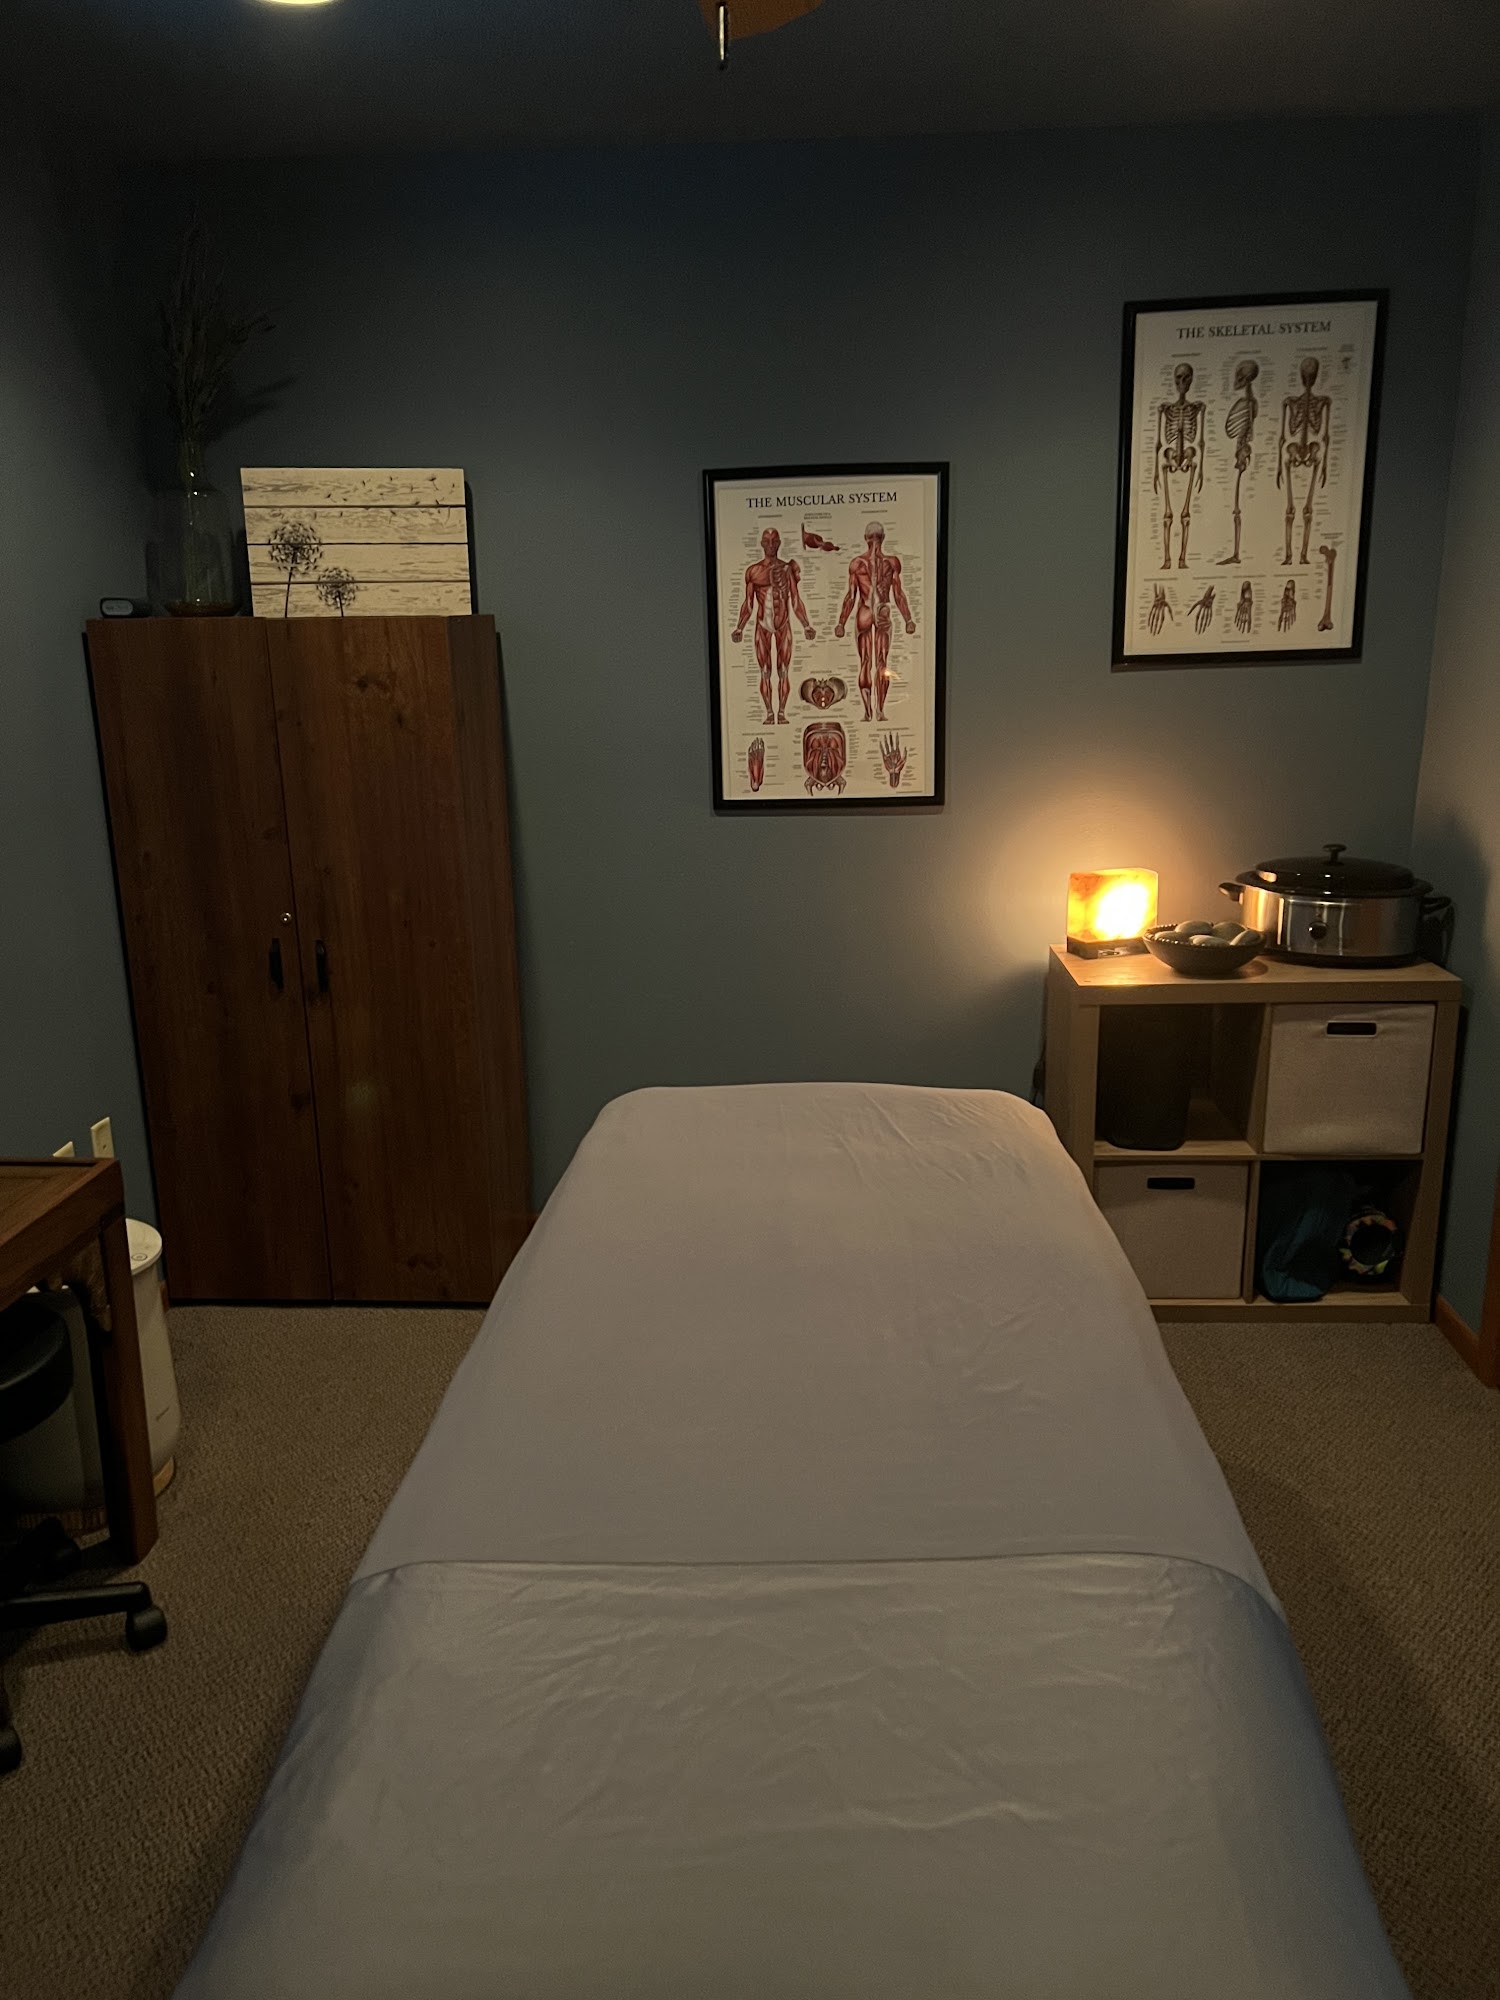 Massage by Payton 603 6th Ave, Grinnell Iowa 50112